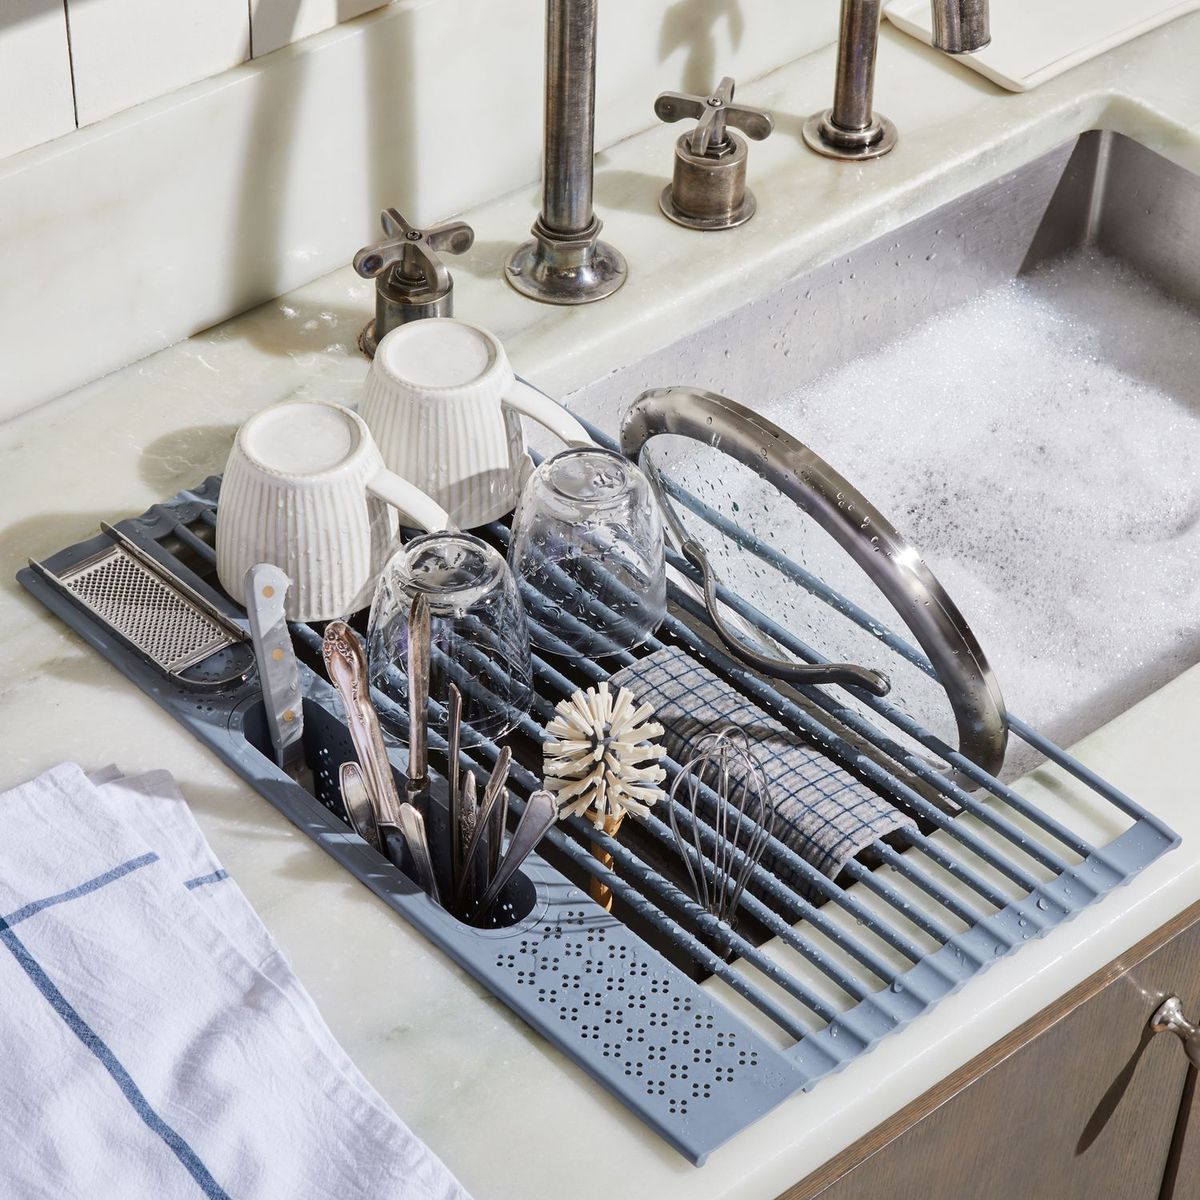 Dish Drying Rack, Over The Sink Dish Drying Rack Stainless Steel